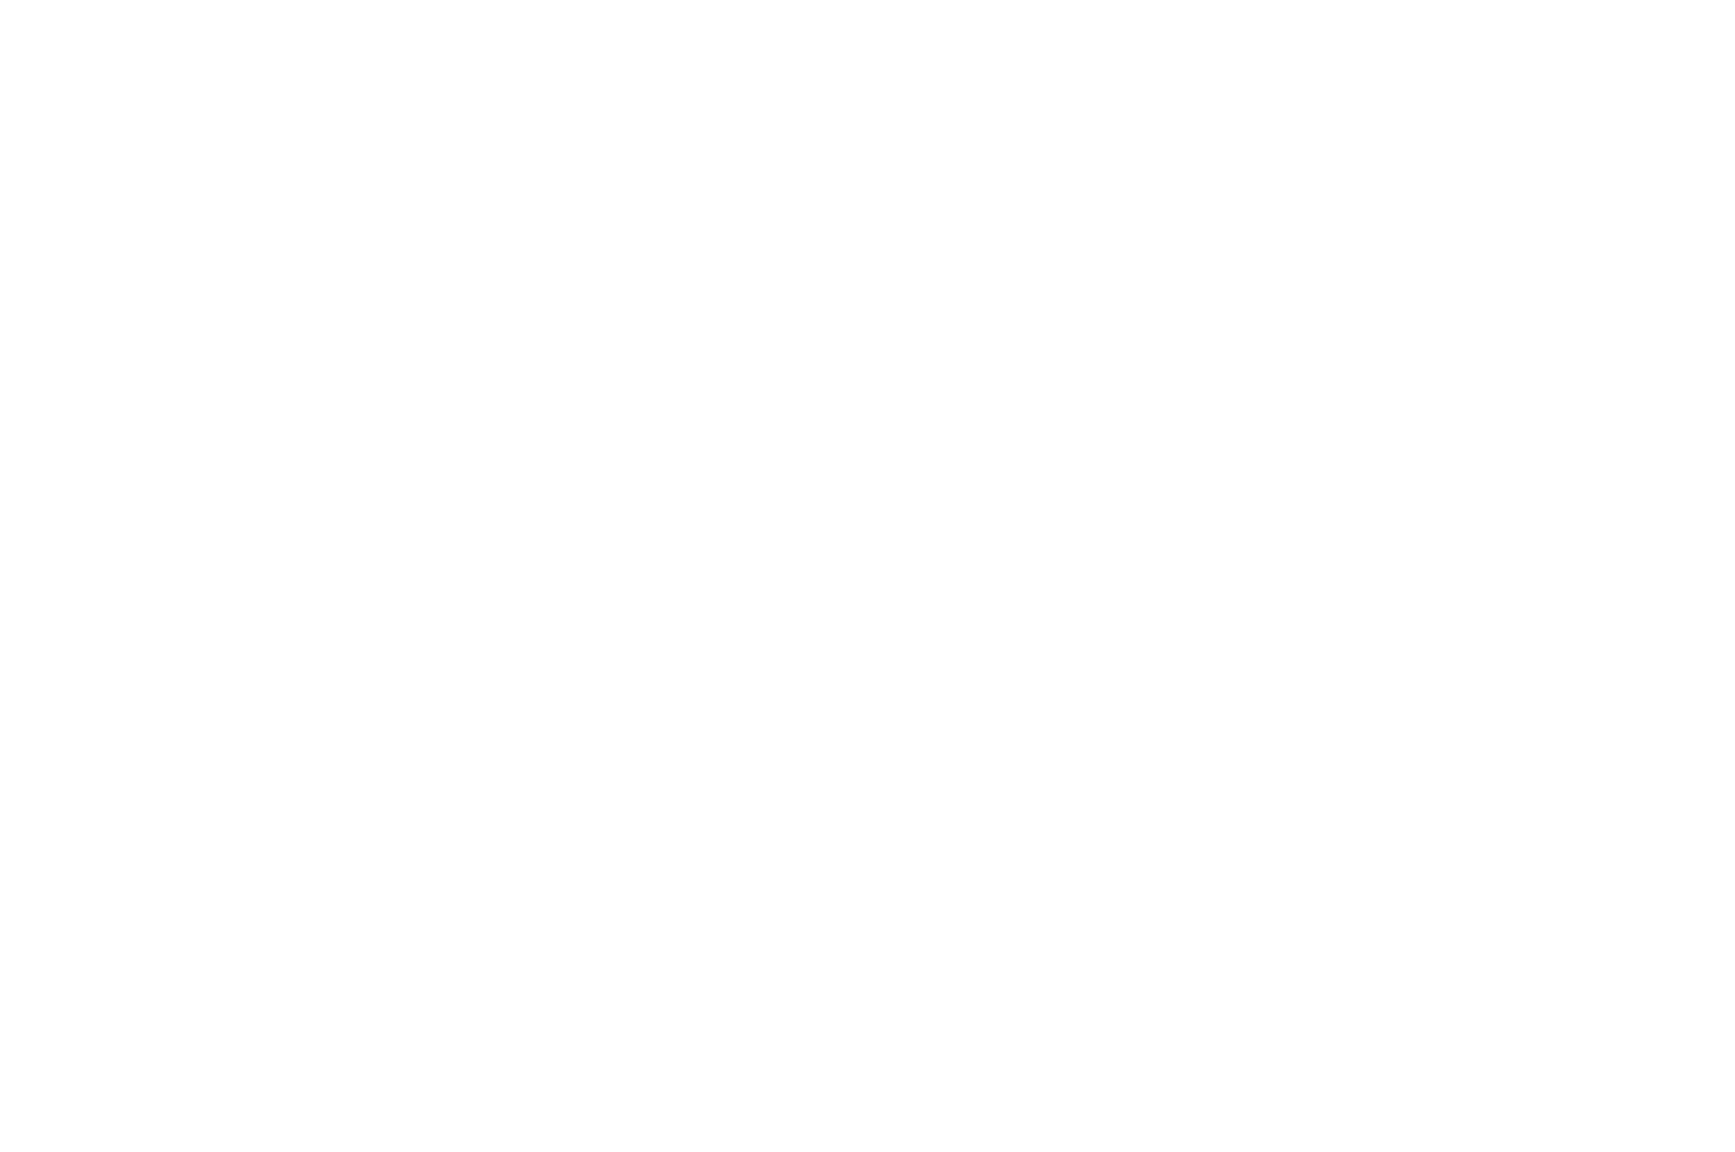 ORIGINAL SONG MUSIC VIDEO - The IndieFEST Film Awards - 2022